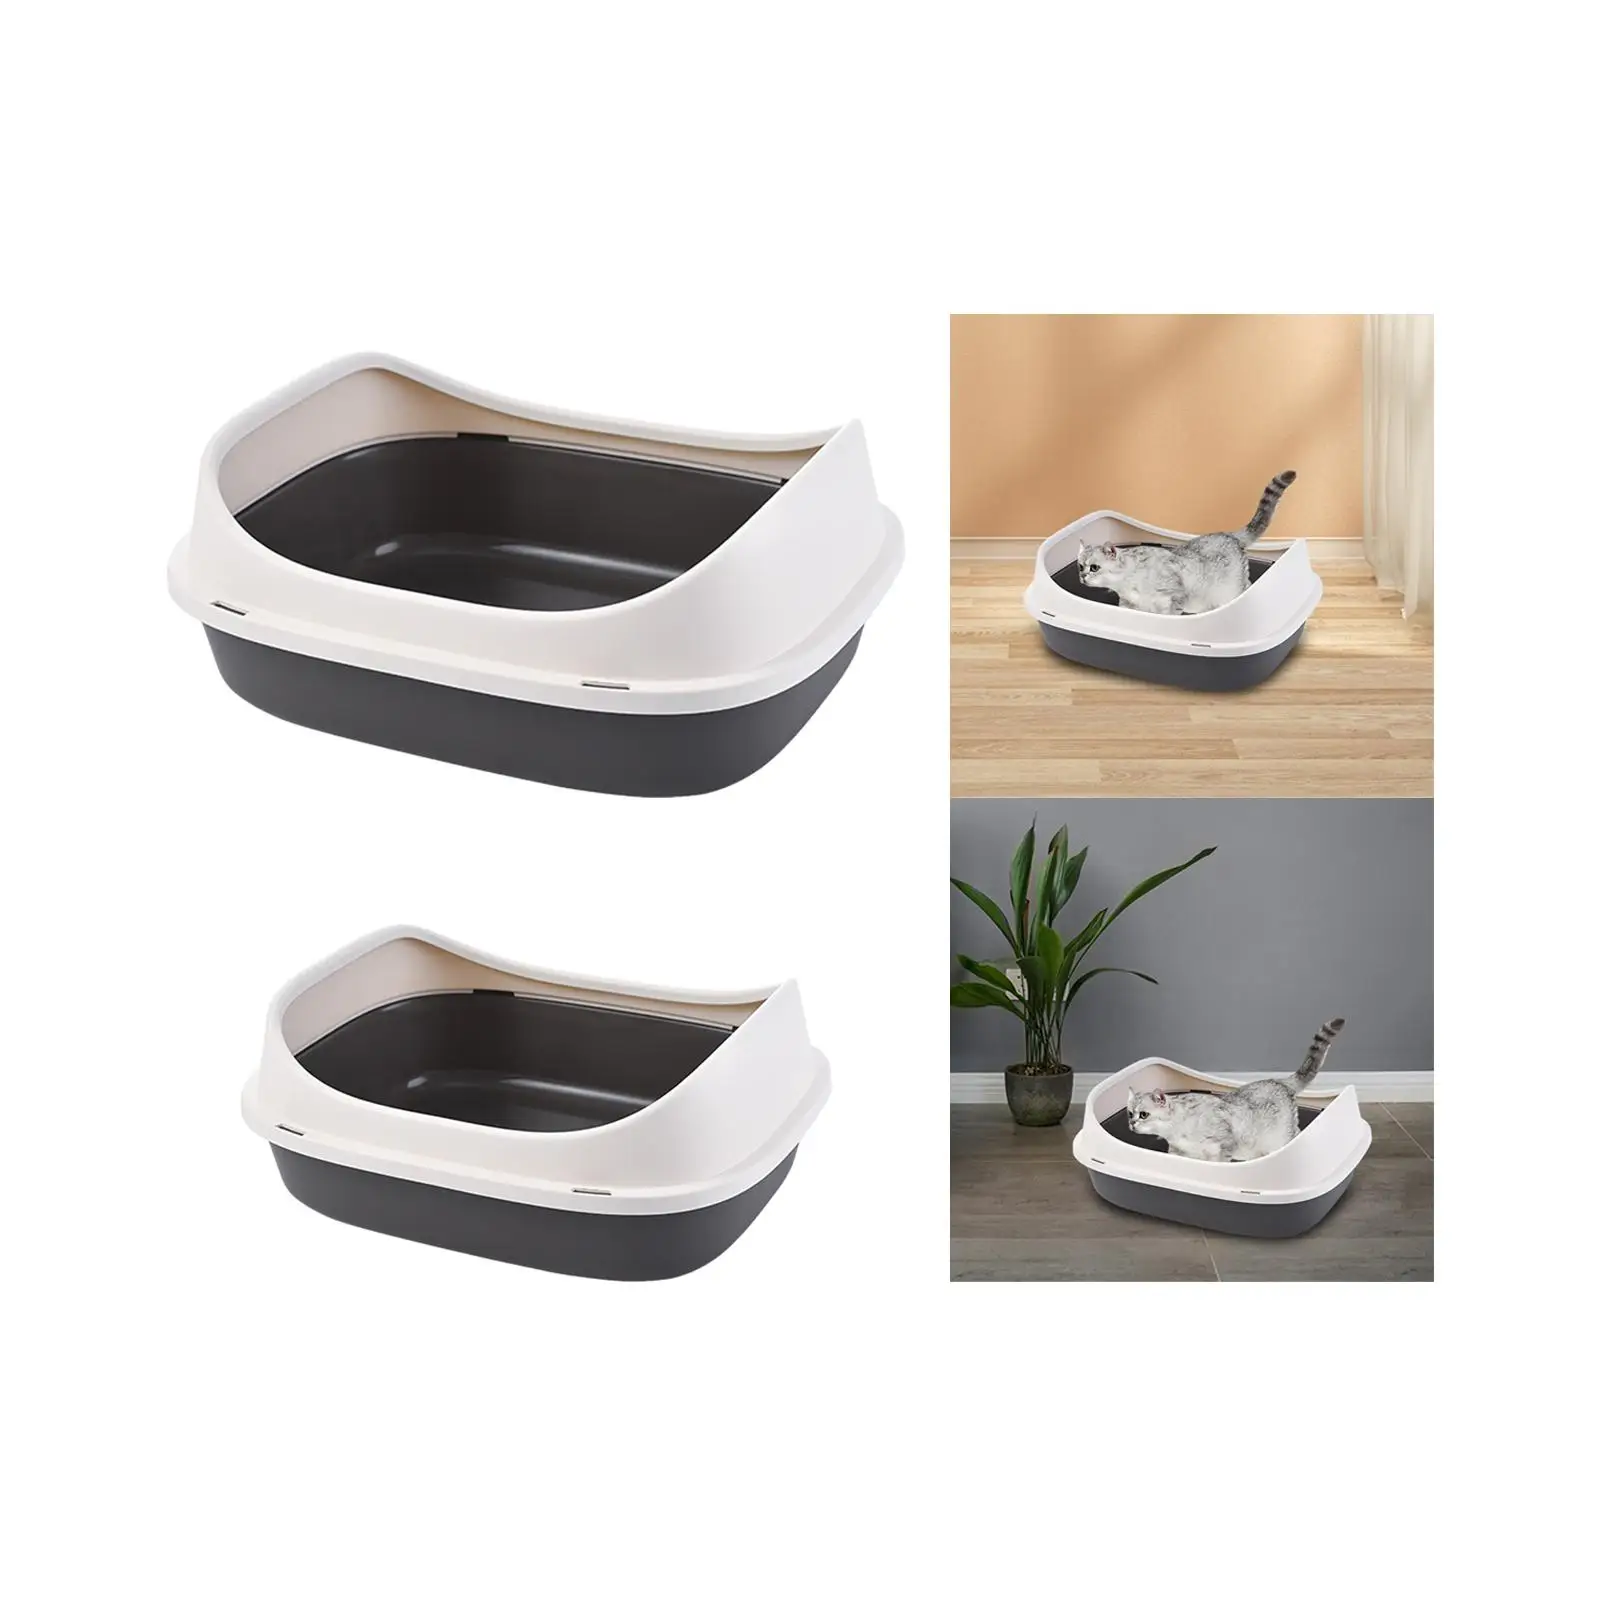 Open Top Cat Litter Box Pet Bedpan with Scatter Shield and Scoop Litter Pan for Kitty Small Medium Cats Pets Bunny Rabbit